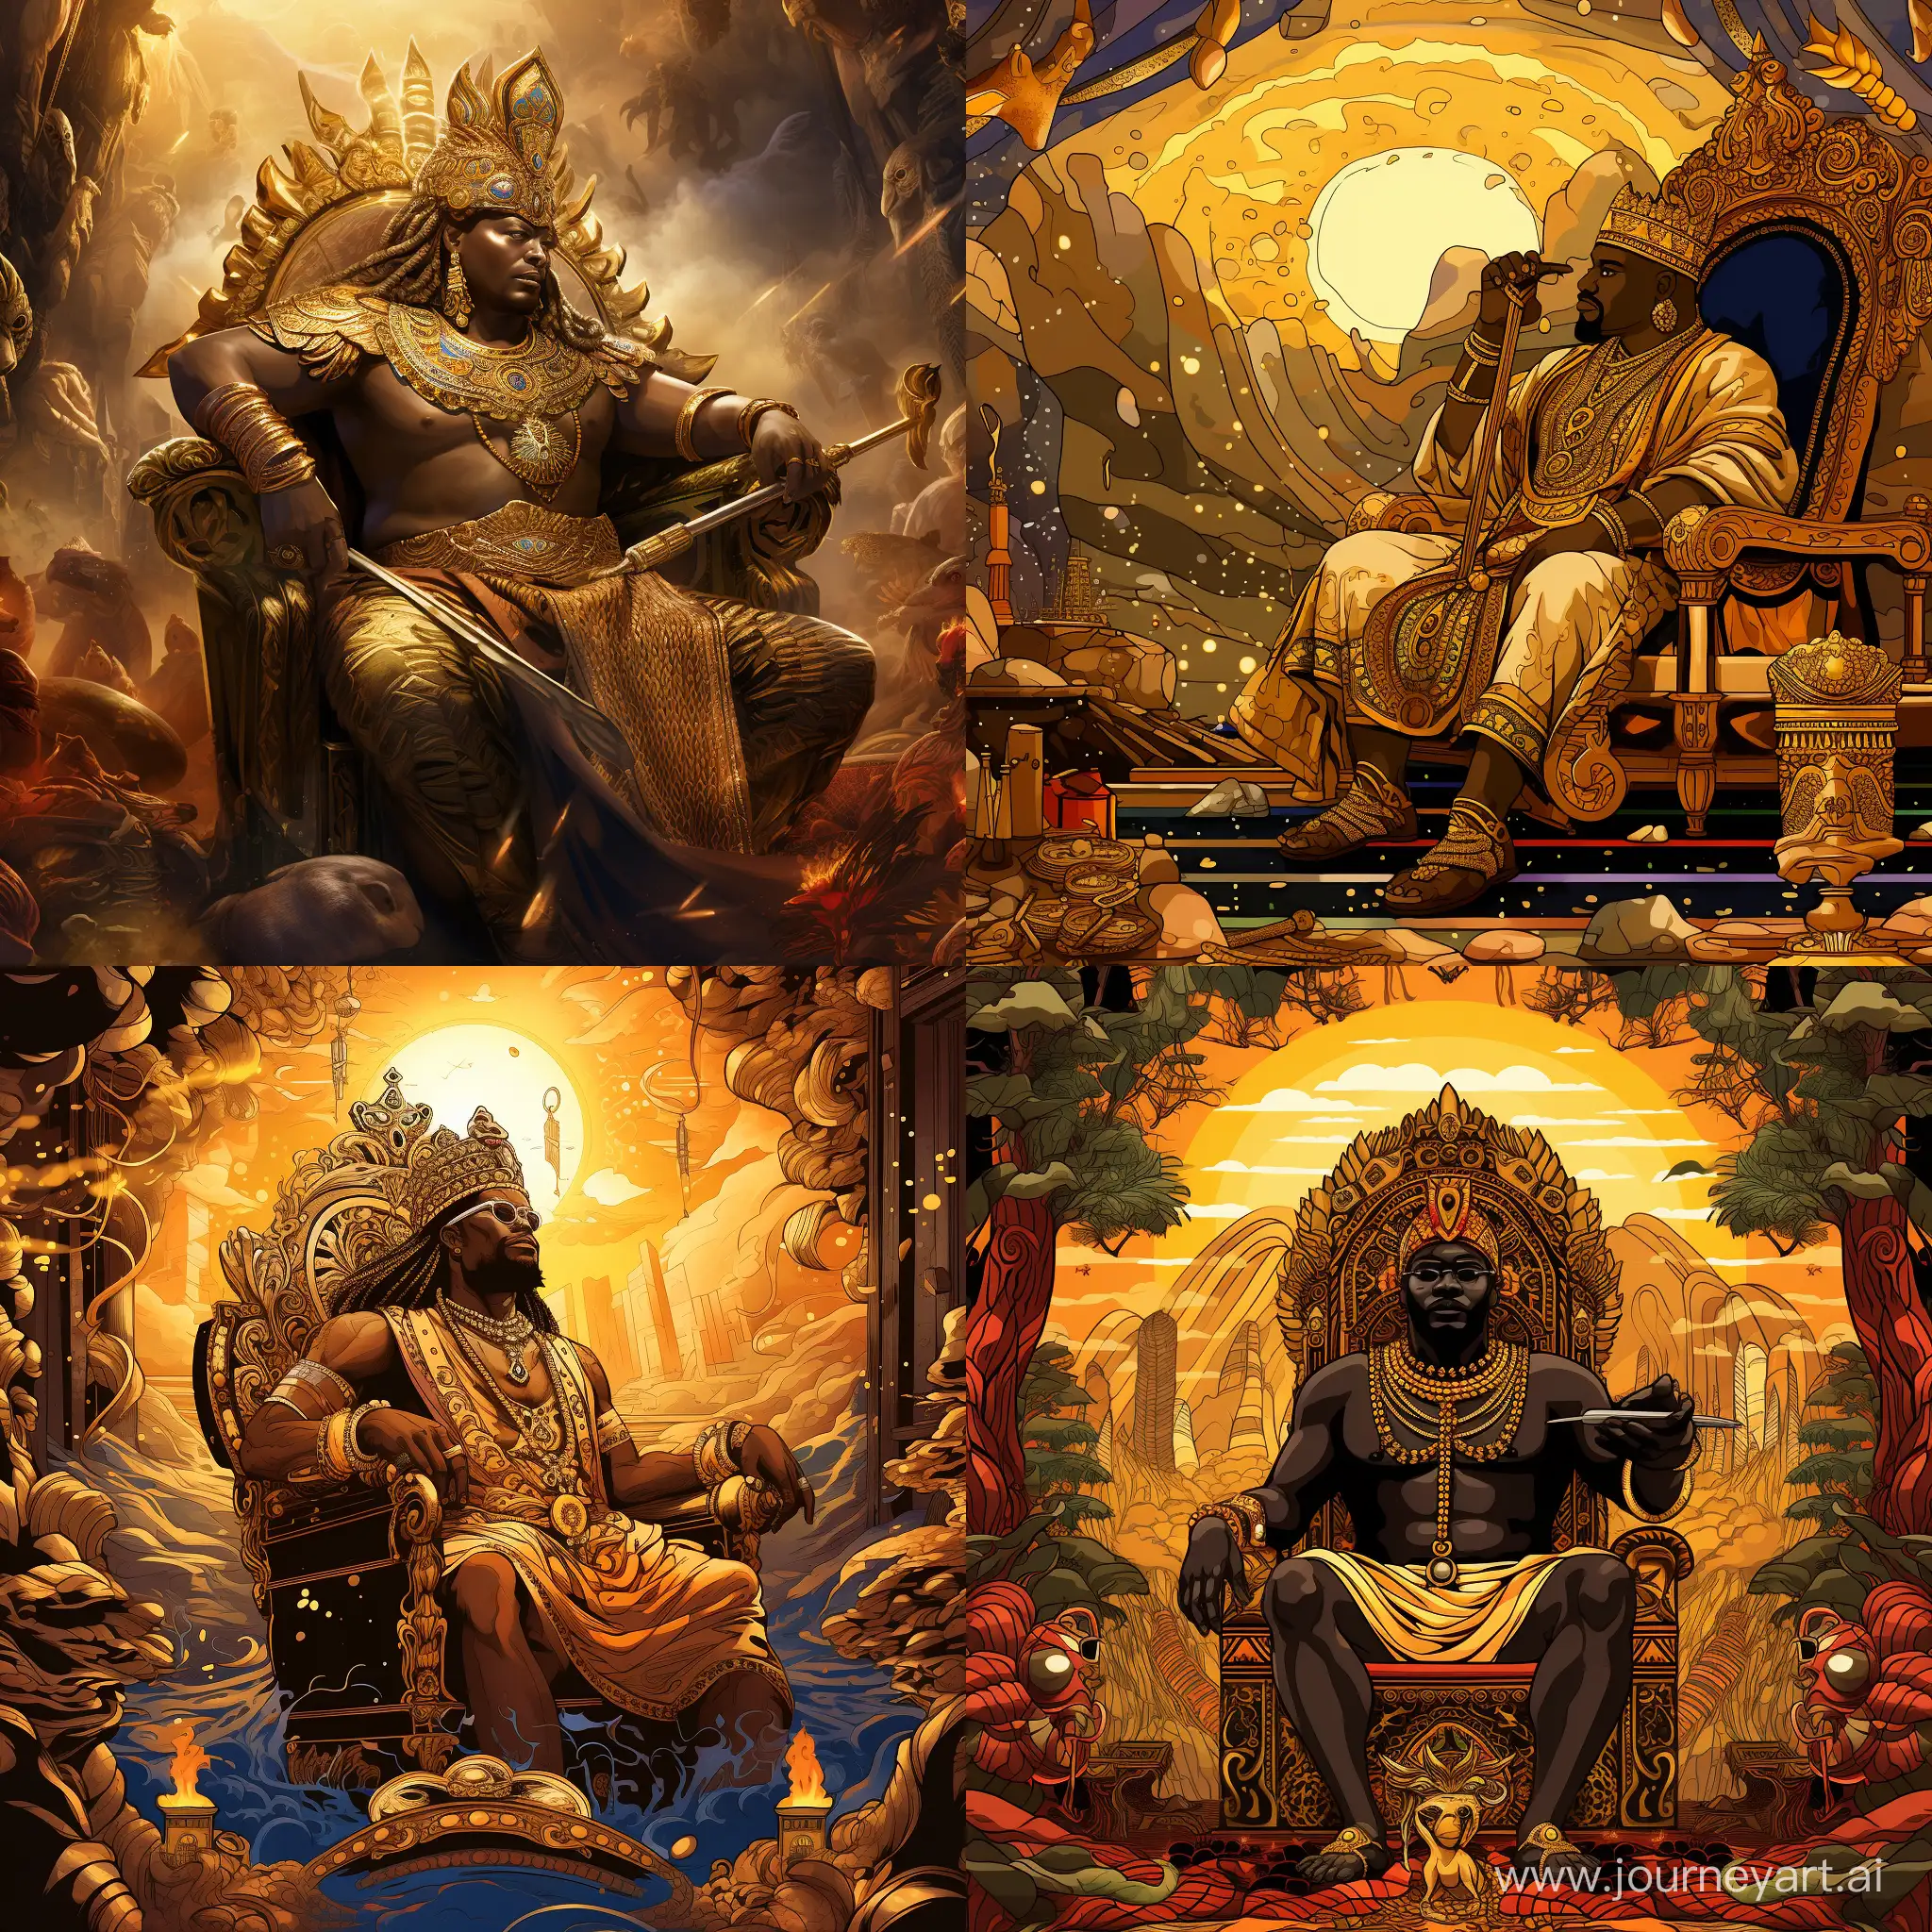 Create a detailed illustration of a majestic scene featuring a large, unattractive, obese African king seated on his opulent throne within his expansive kingdom. The king is adorned in lavish gold attire, and he is leisurely smoking a sizable gold vape. A wide shot should capture the entirety of the scene, showcasing the king's imposing presence and the grandeur of his surroundings. Additionally, include a bathtub filled with yellow slop situated next to the king, adding an element of eccentricity to the composition